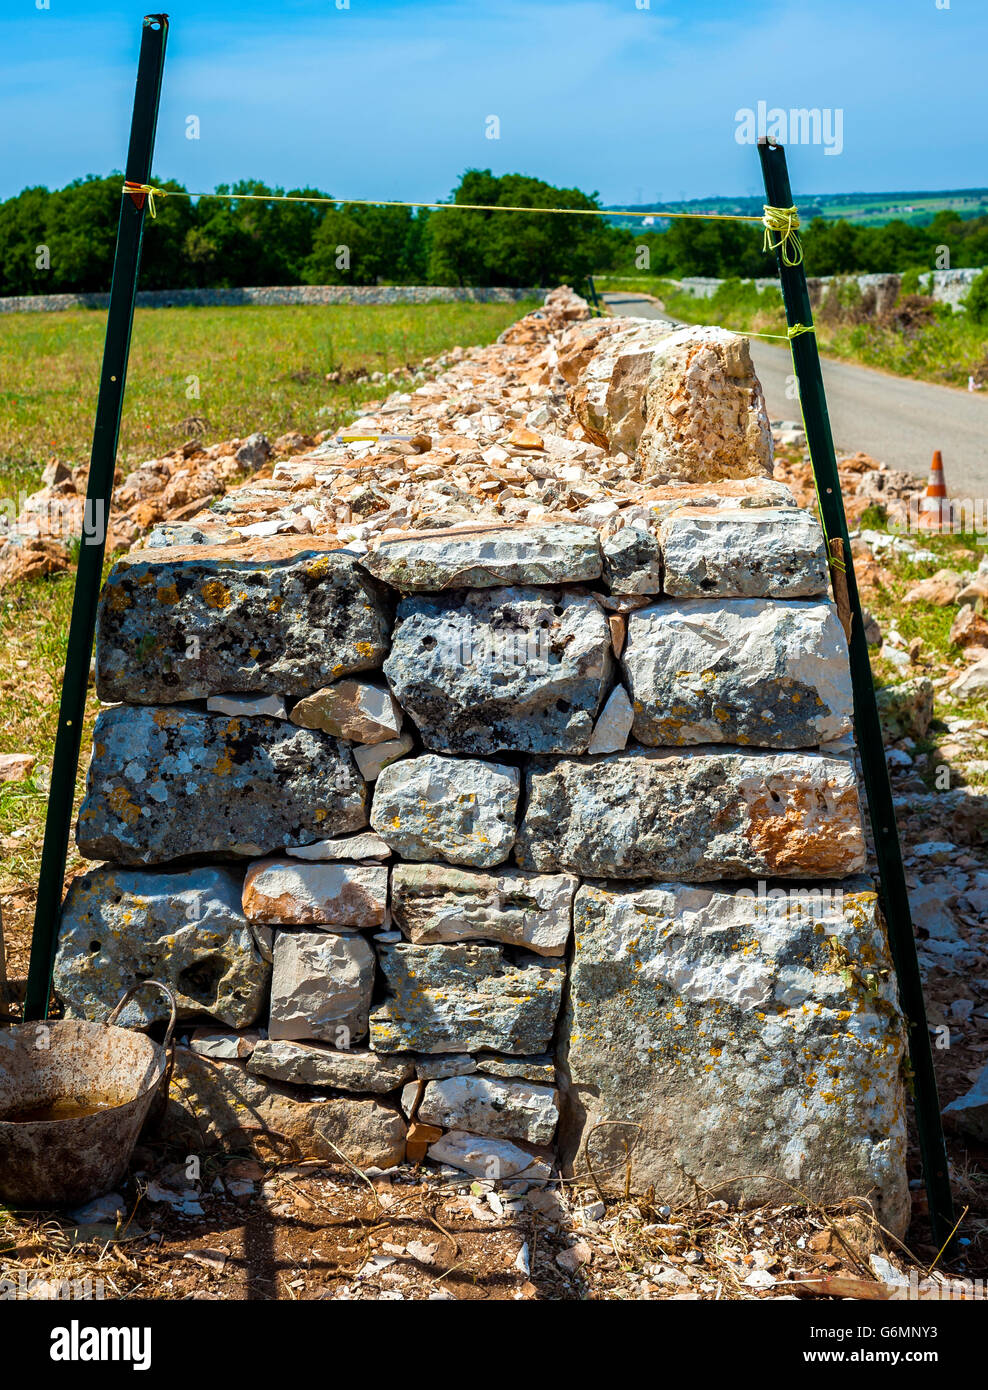 Restore drywall with stones wall in focus in the countryside of Apulia Stock Photo